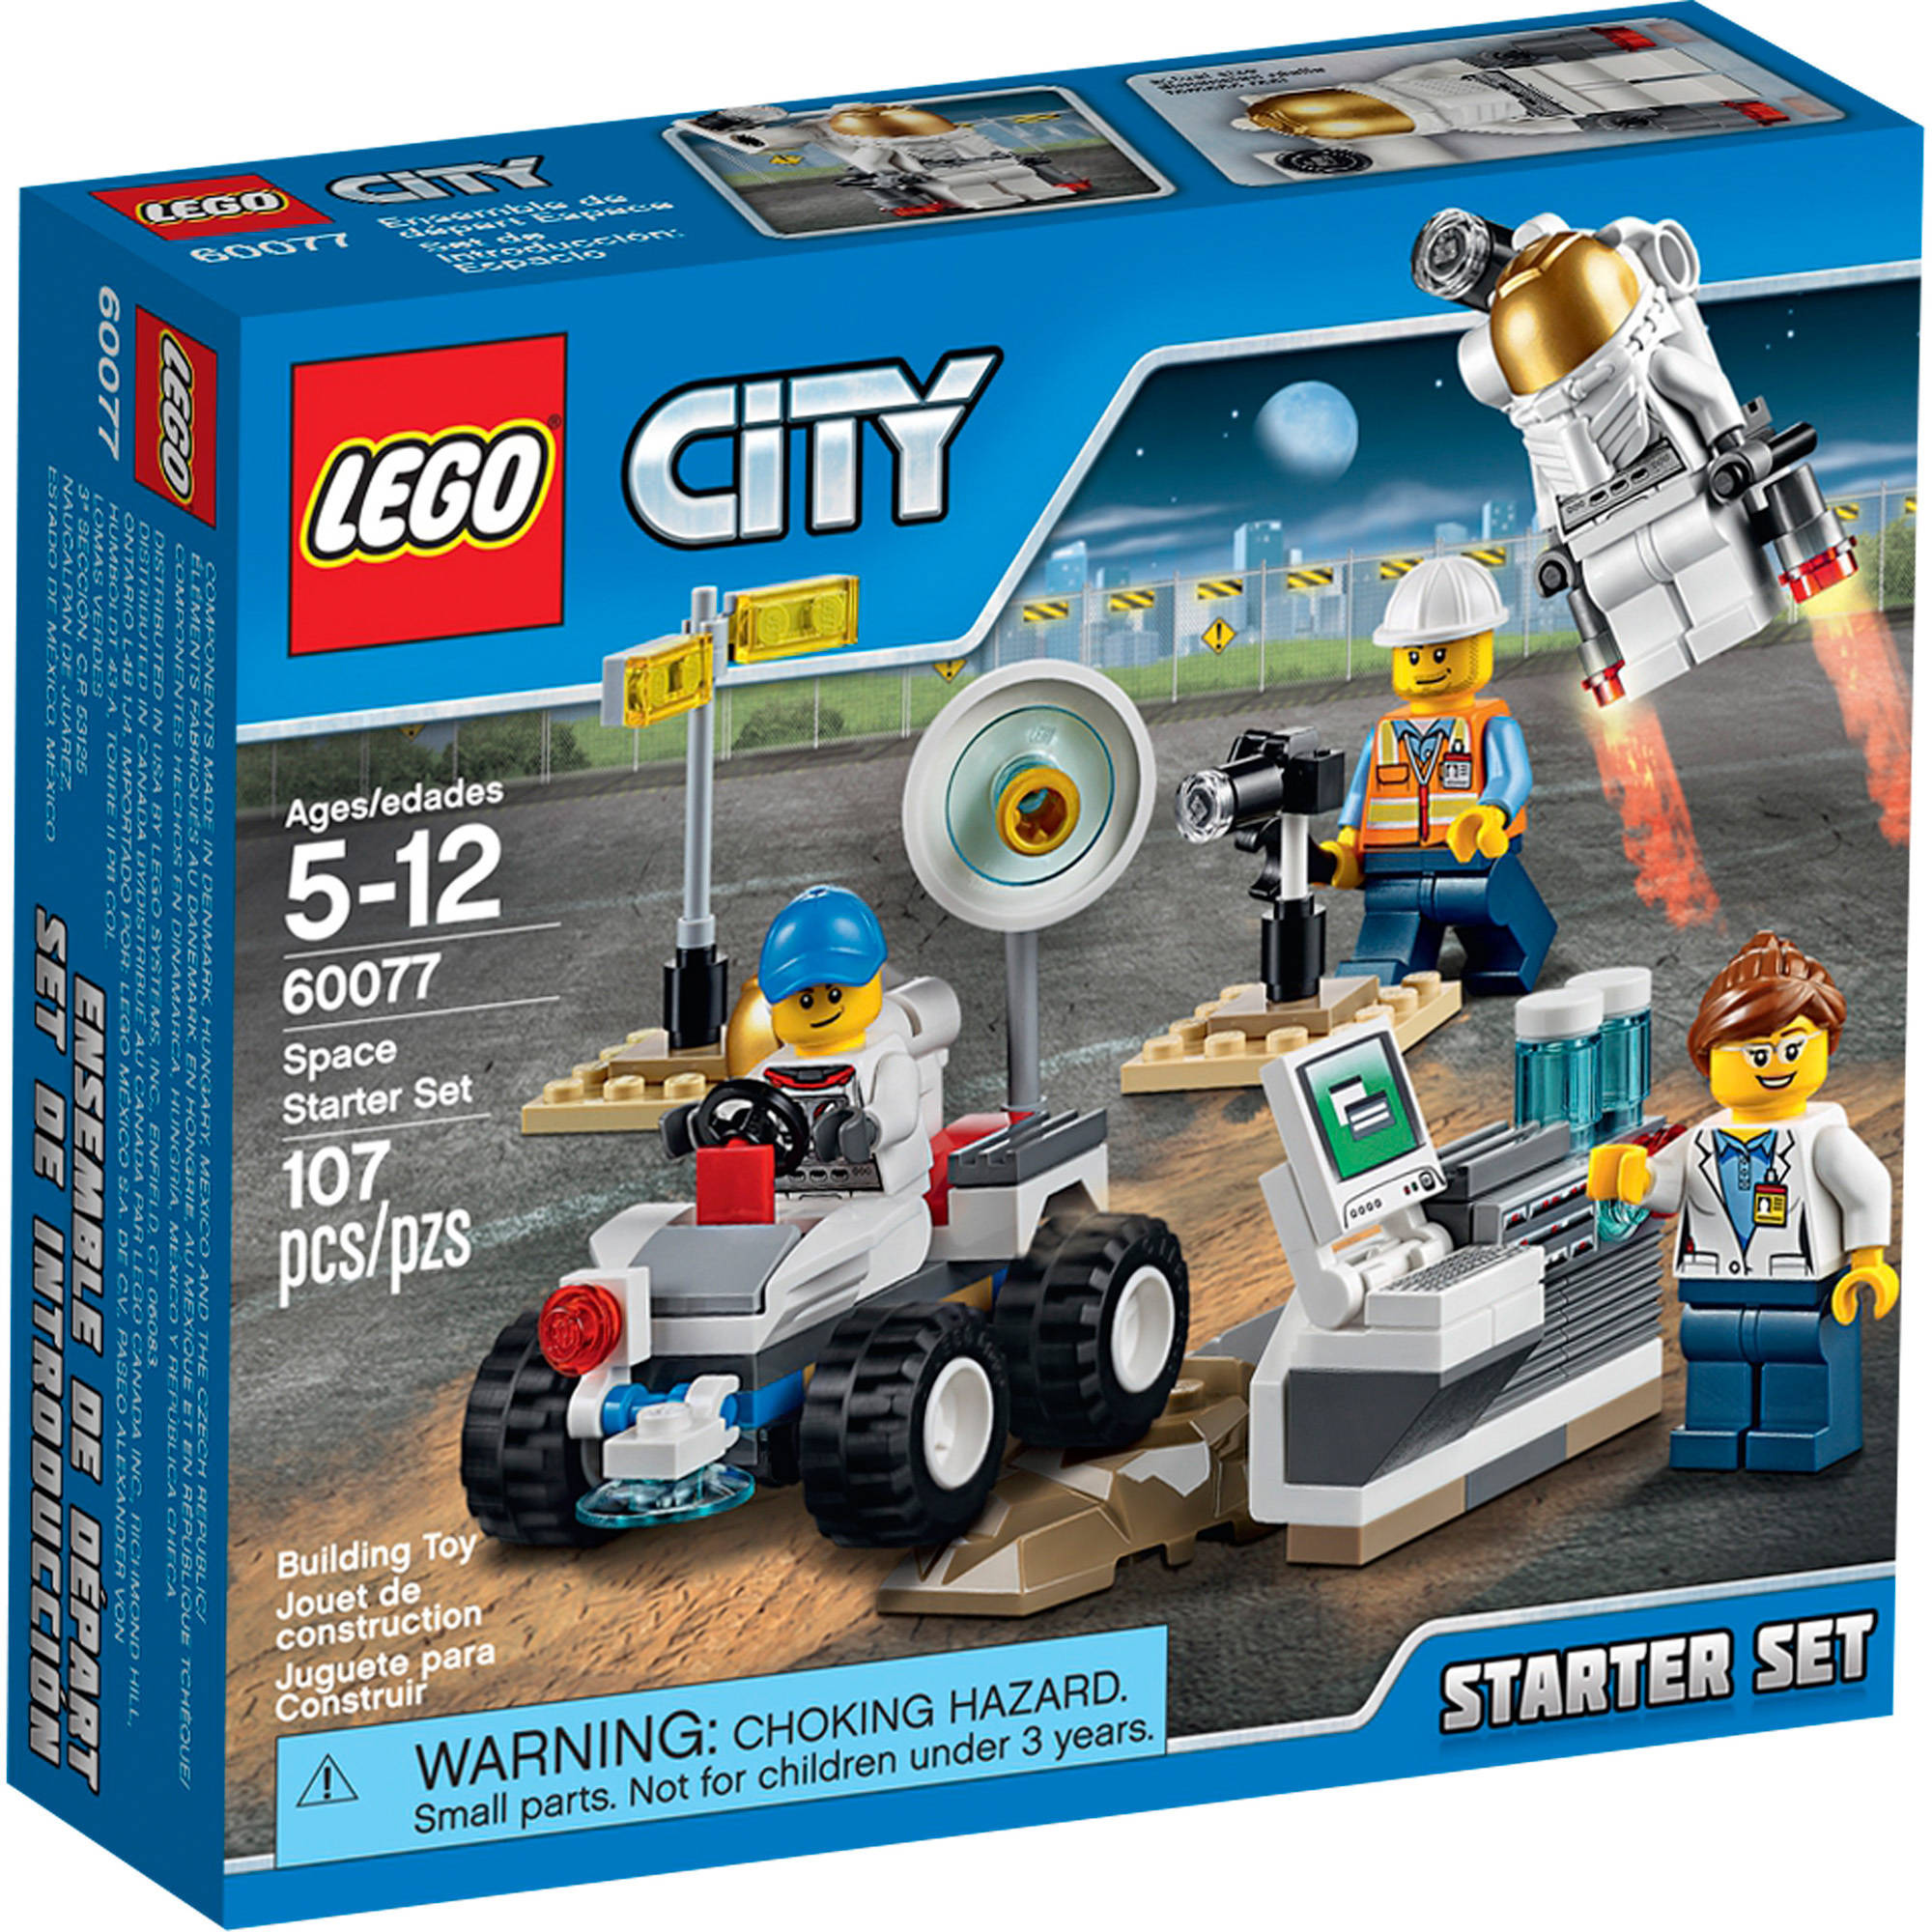 LEGO City Space Port Space Starter Set, 60077 - image 1 of 3